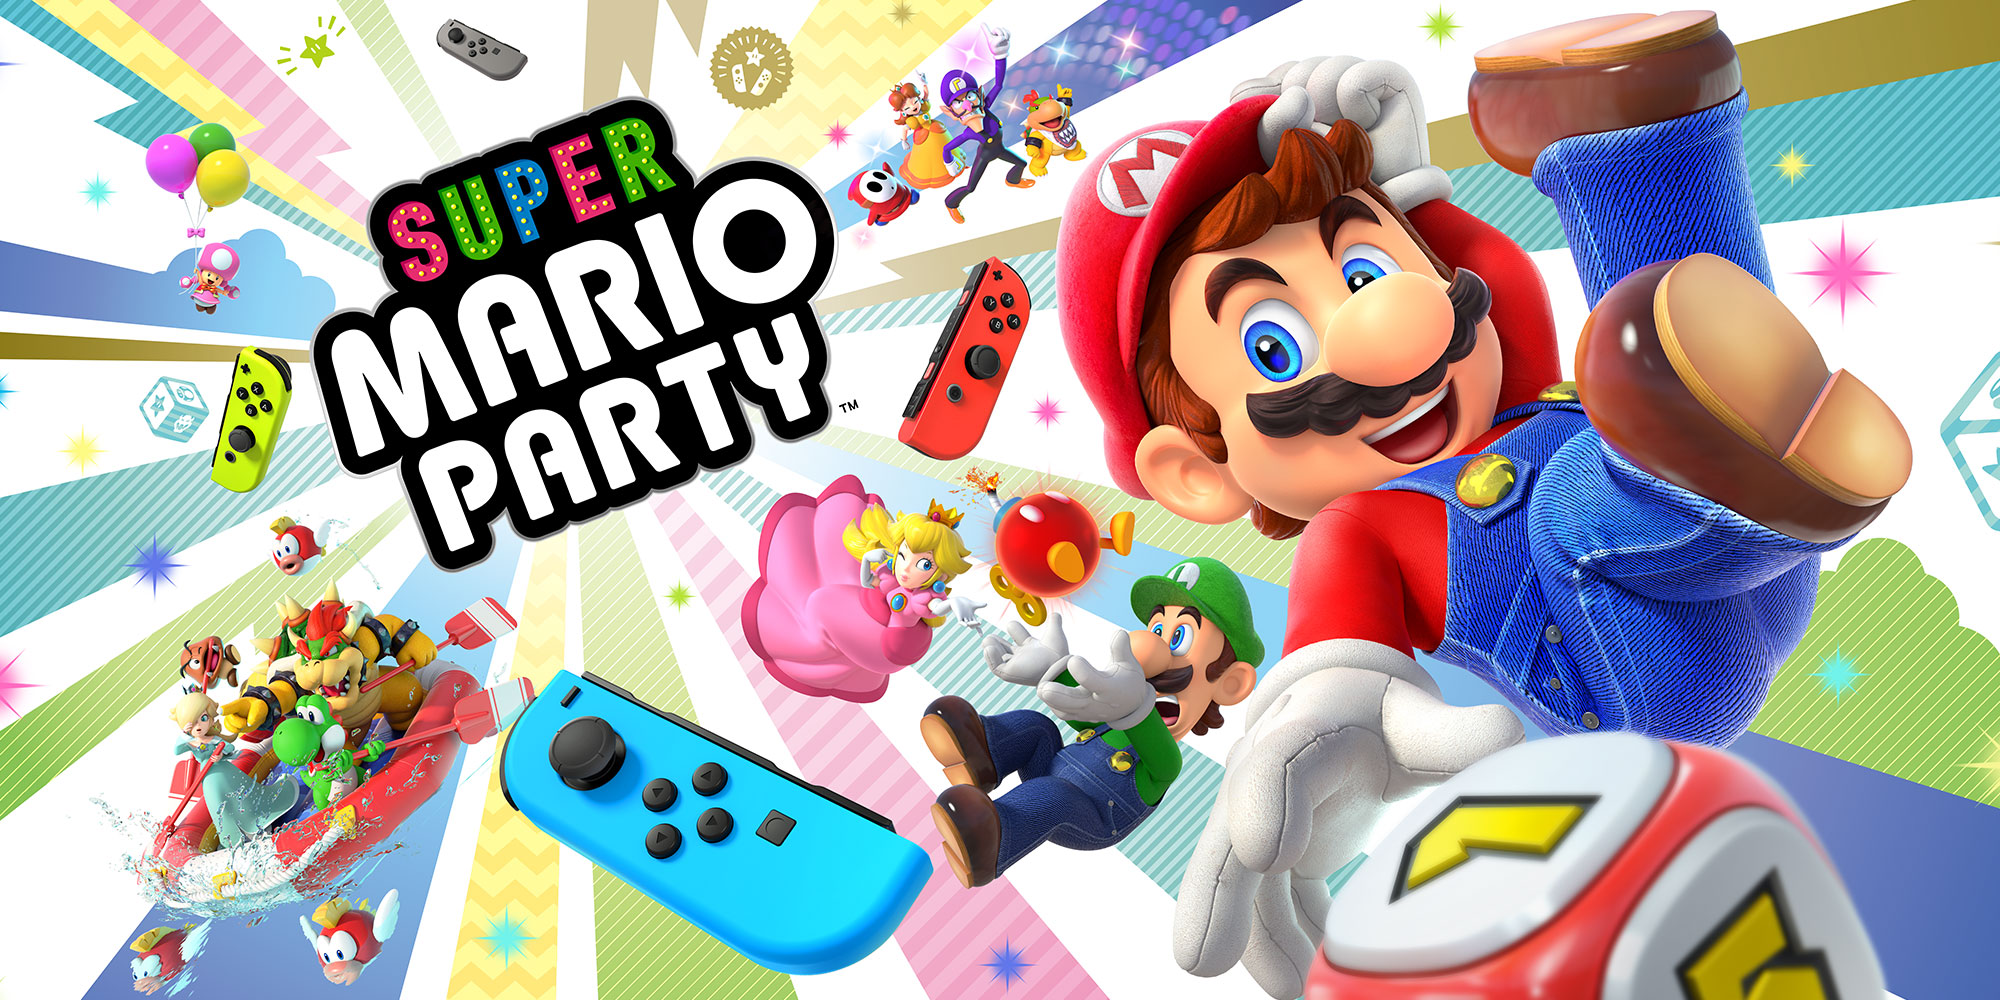 Macadam Derivation korruption Is Super Mario Party Pro Controller or Joy-Con only? | PinkNews